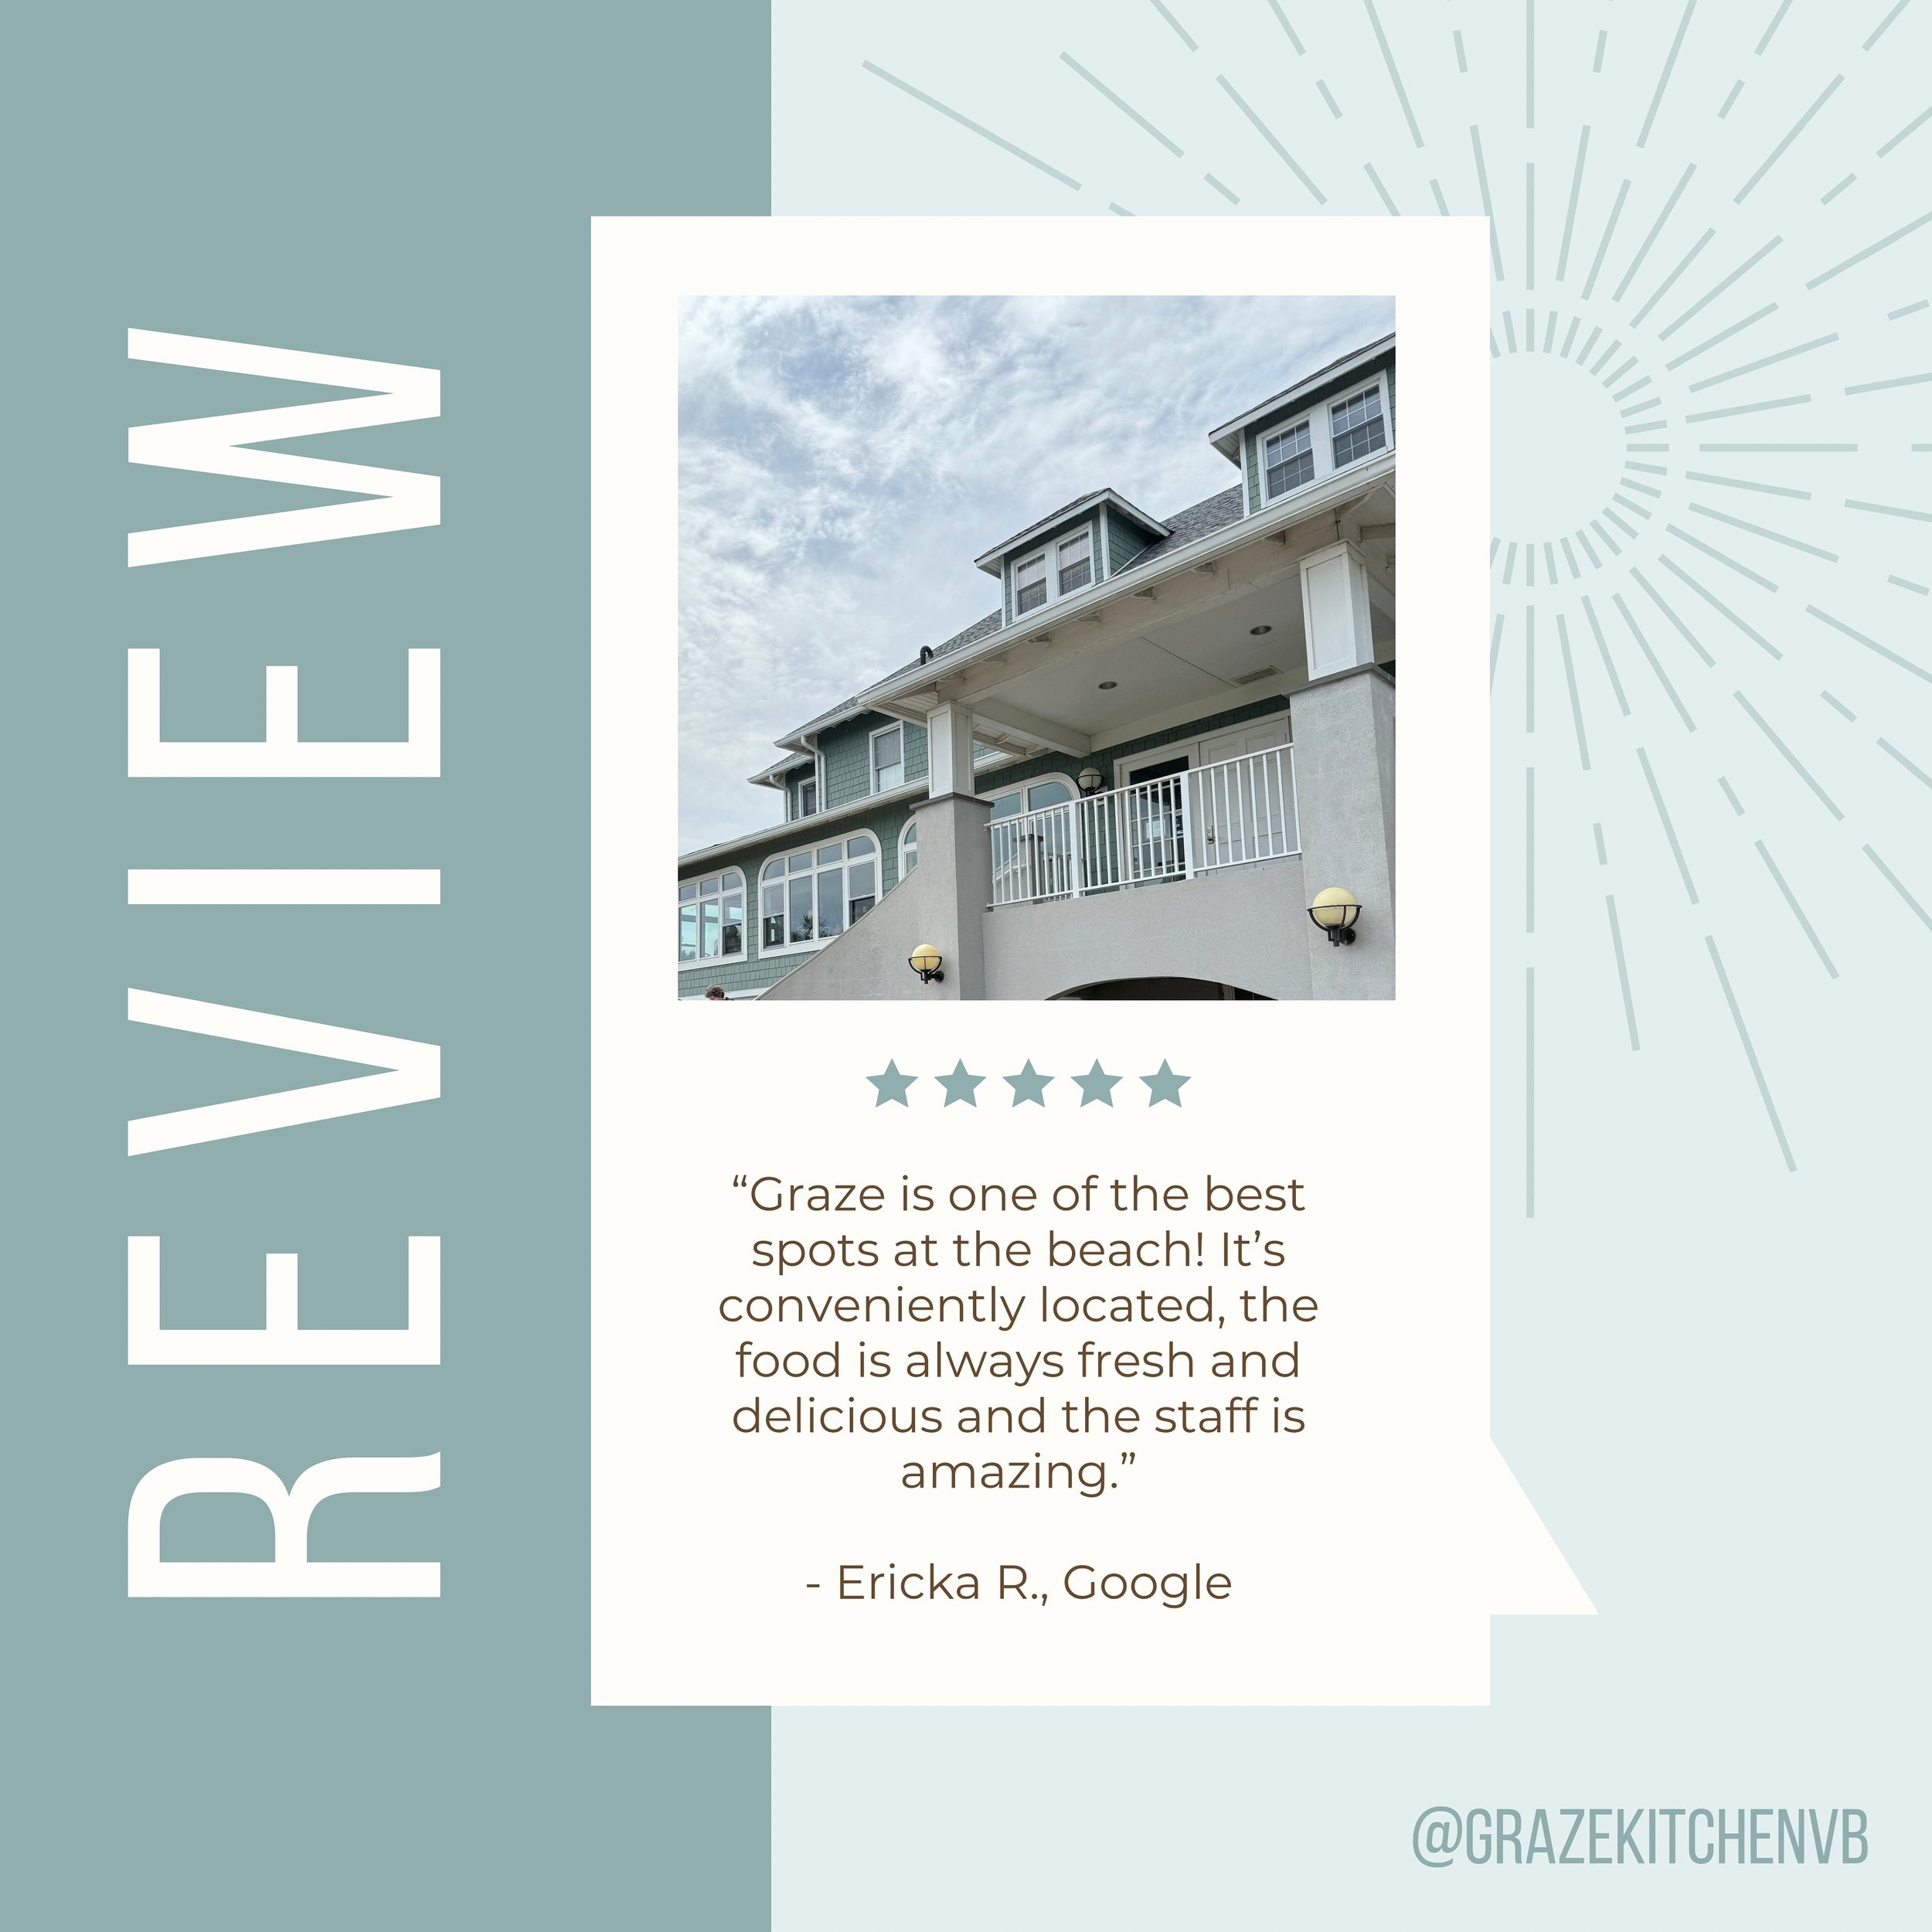 &ldquo;Graze is one of the best spots at the beach! It&rsquo;s conveniently located, the food is always fresh and delicious and the staff is amazing.&rdquo; 

- Ericka R., Google

⭐️⭐️⭐️⭐️⭐️

You can find us at the top of the hill on 67th street in V